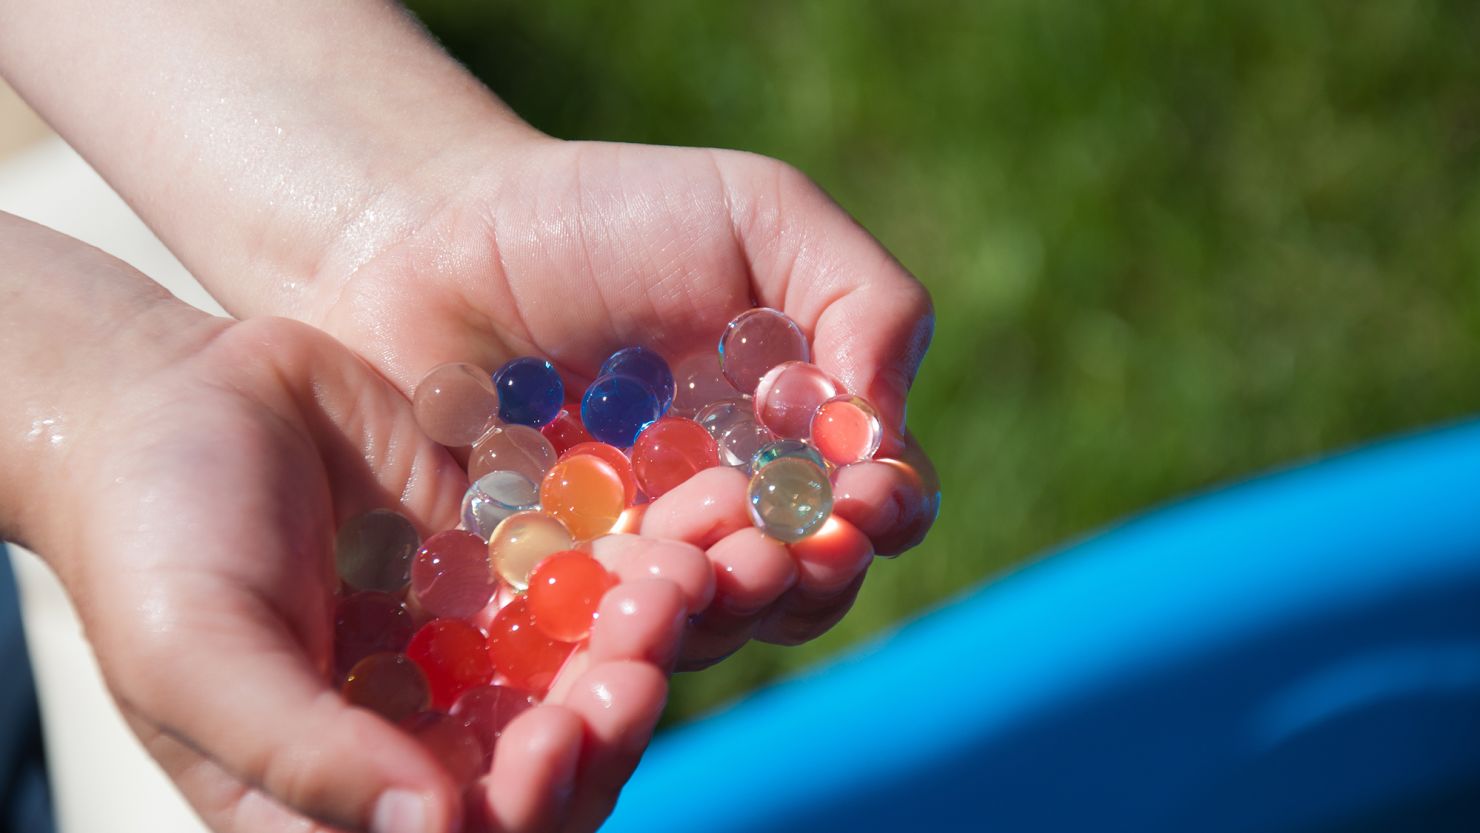 Water beads: Lawmaker calls for national ban on children's toy due to  health risks